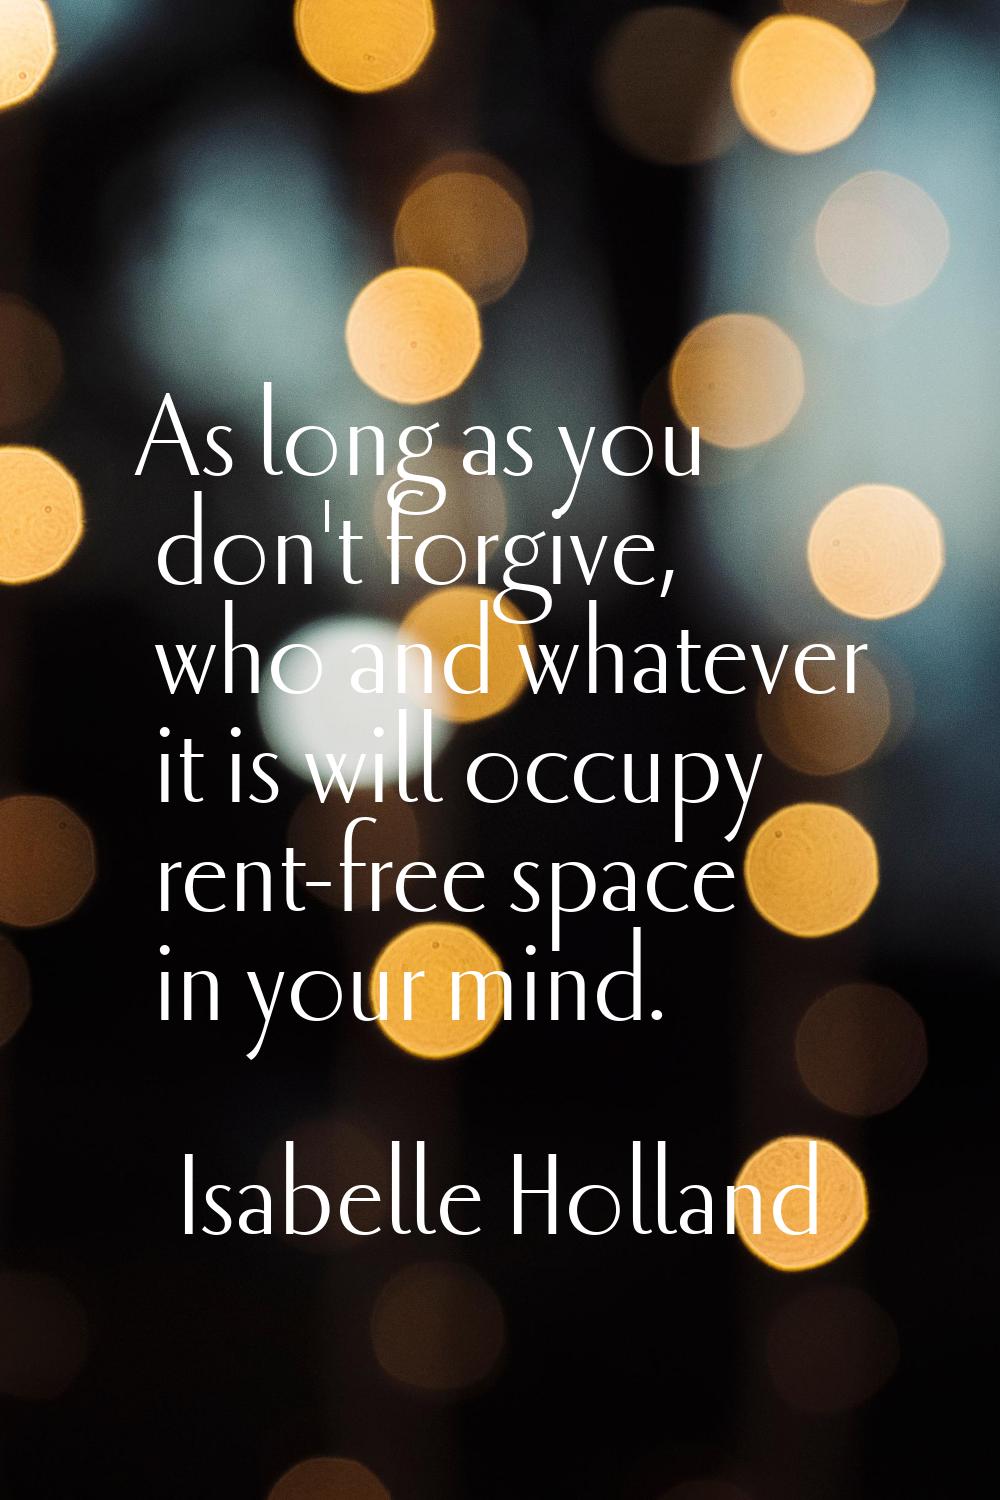 As long as you don't forgive, who and whatever it is will occupy rent-free space in your mind.